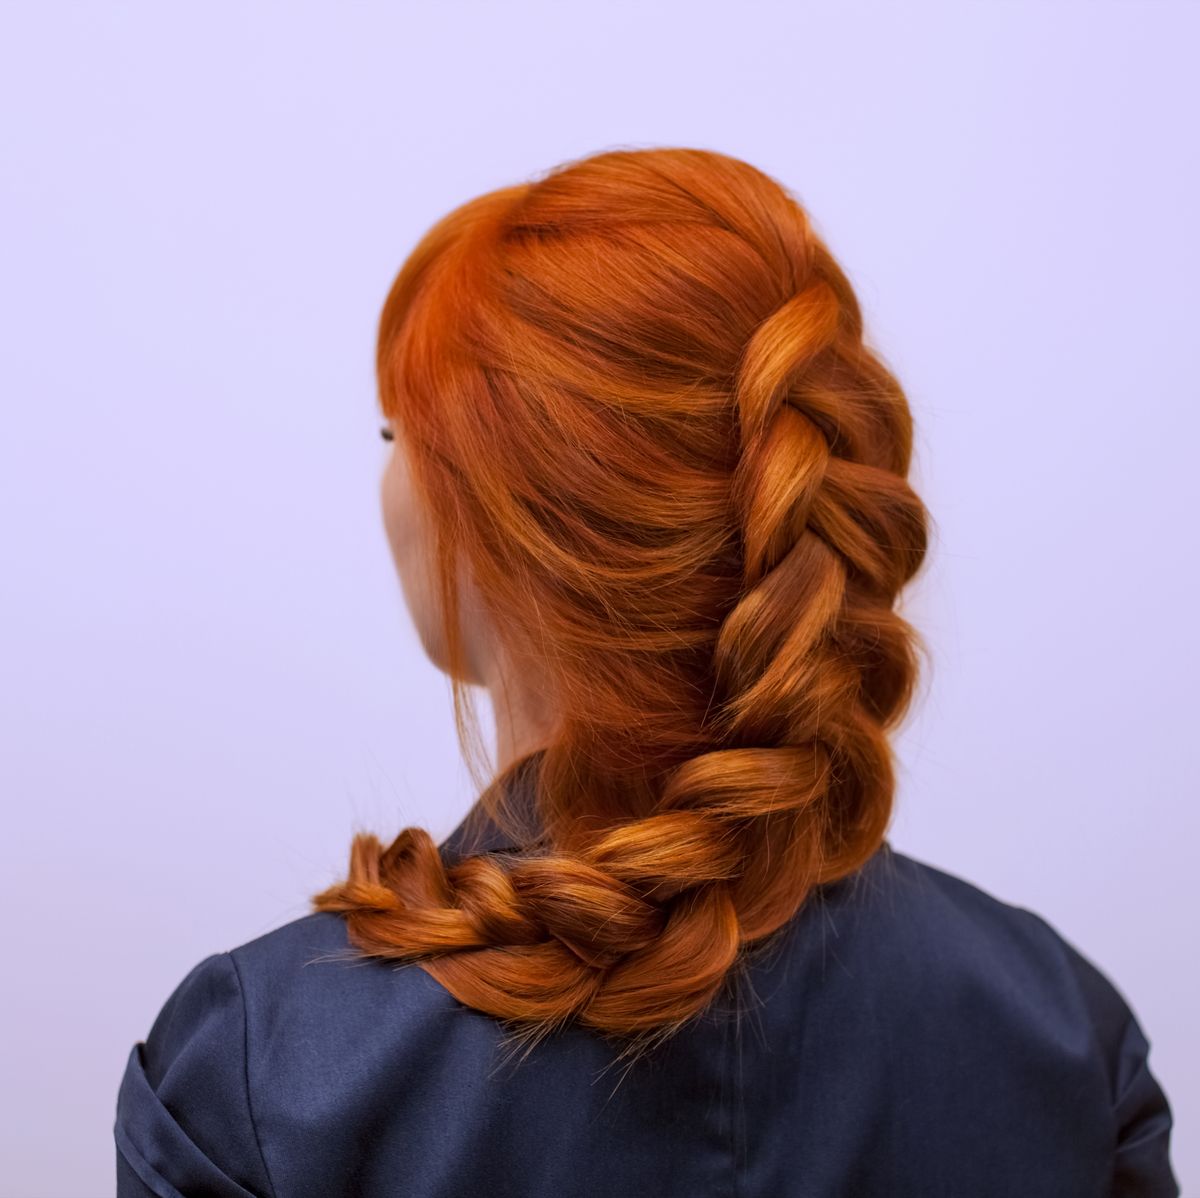 Image of French braid hairstyle for long red hair